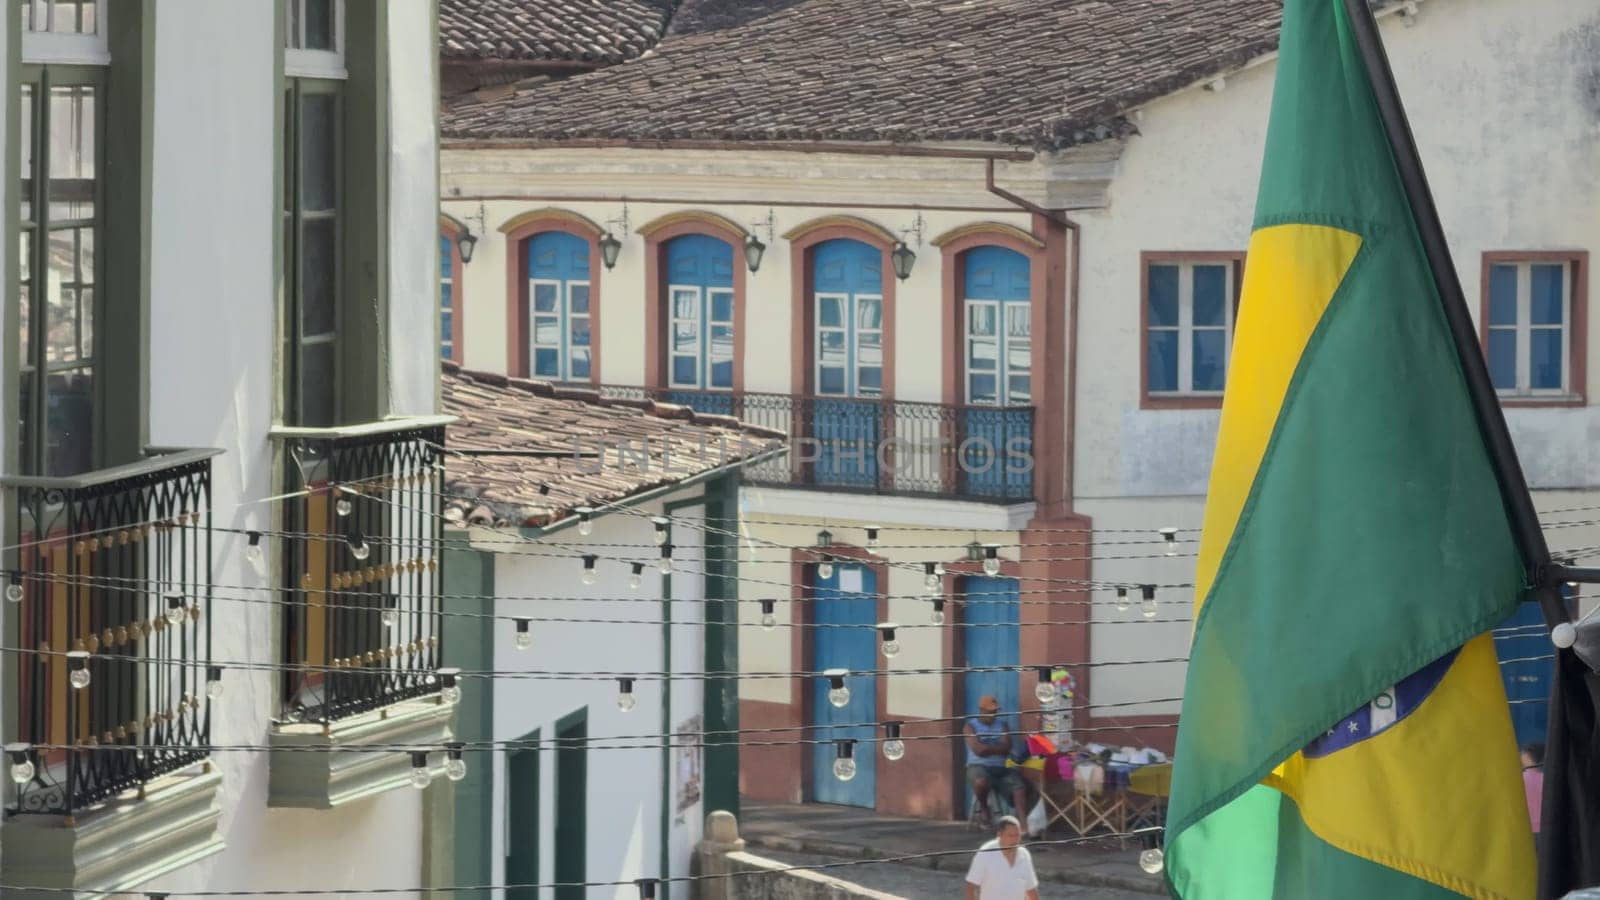 Brazilian Flag Waving with Blurred Street and Passersby by FerradalFCG